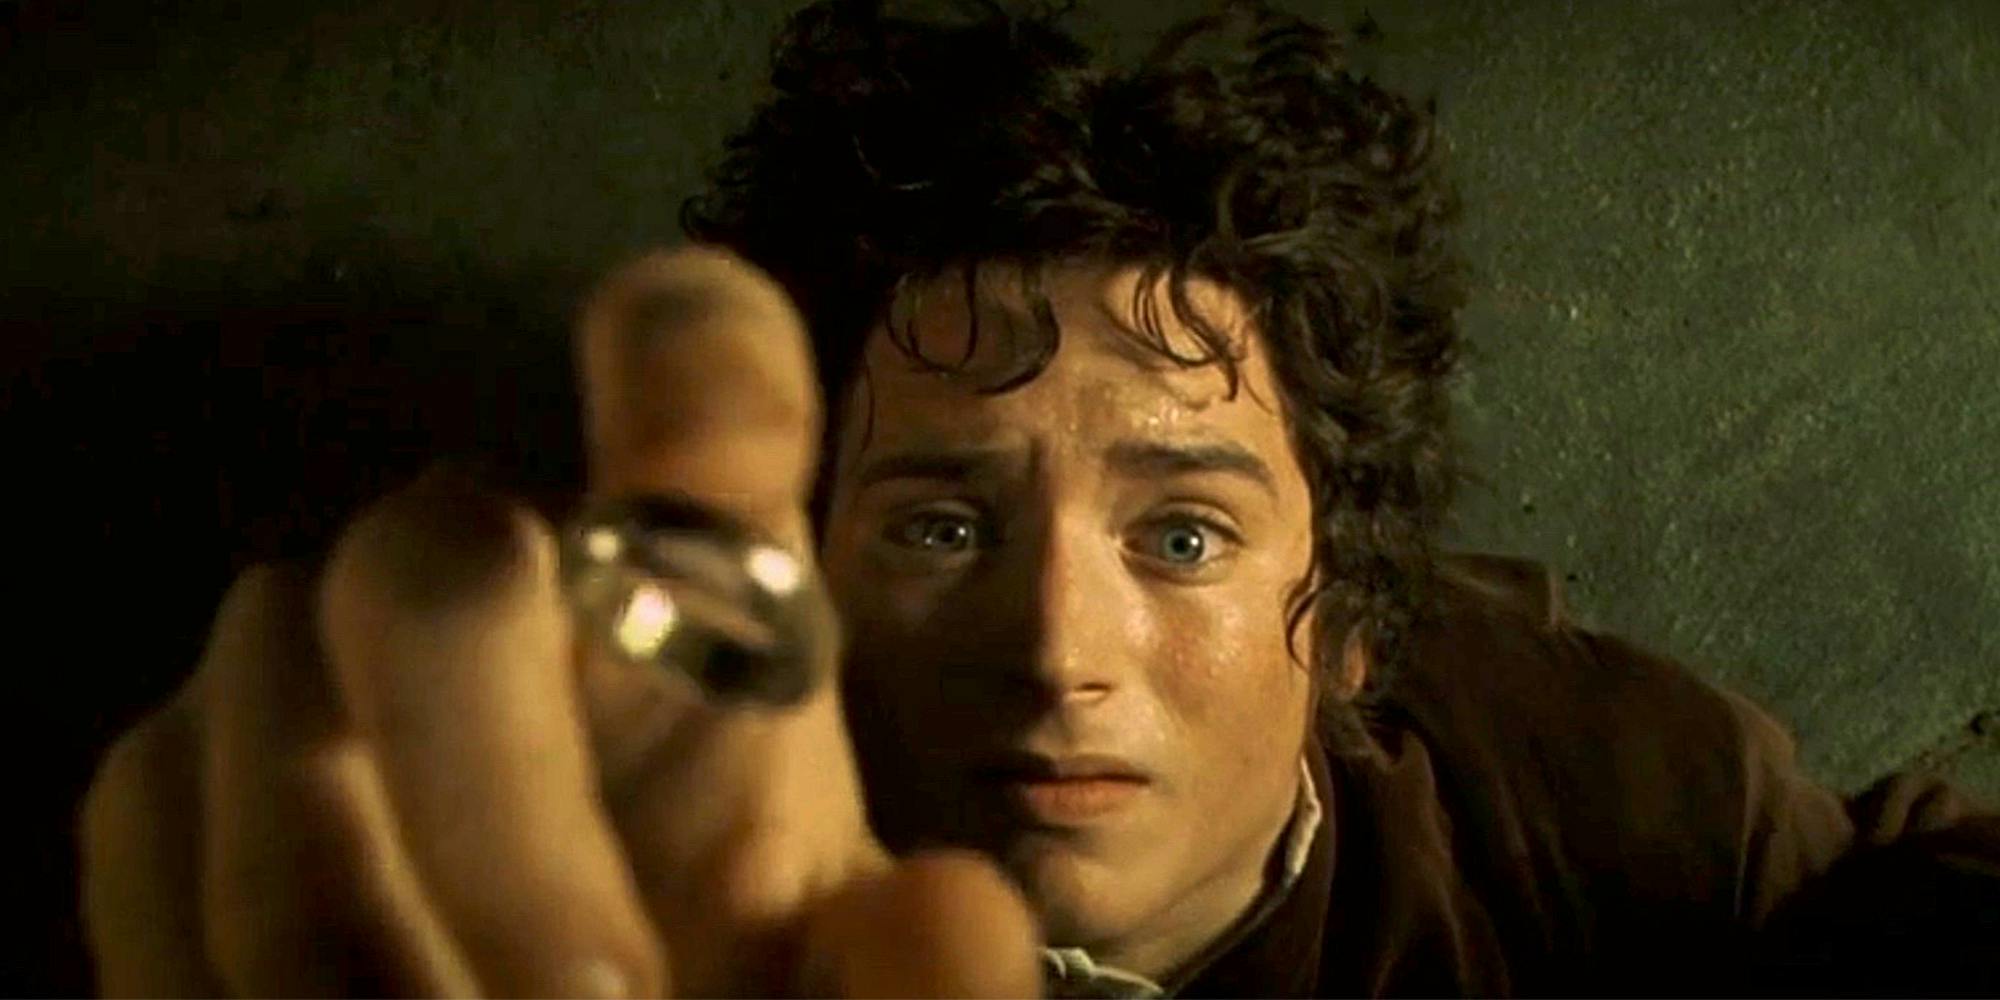 frodo in lord of the rings